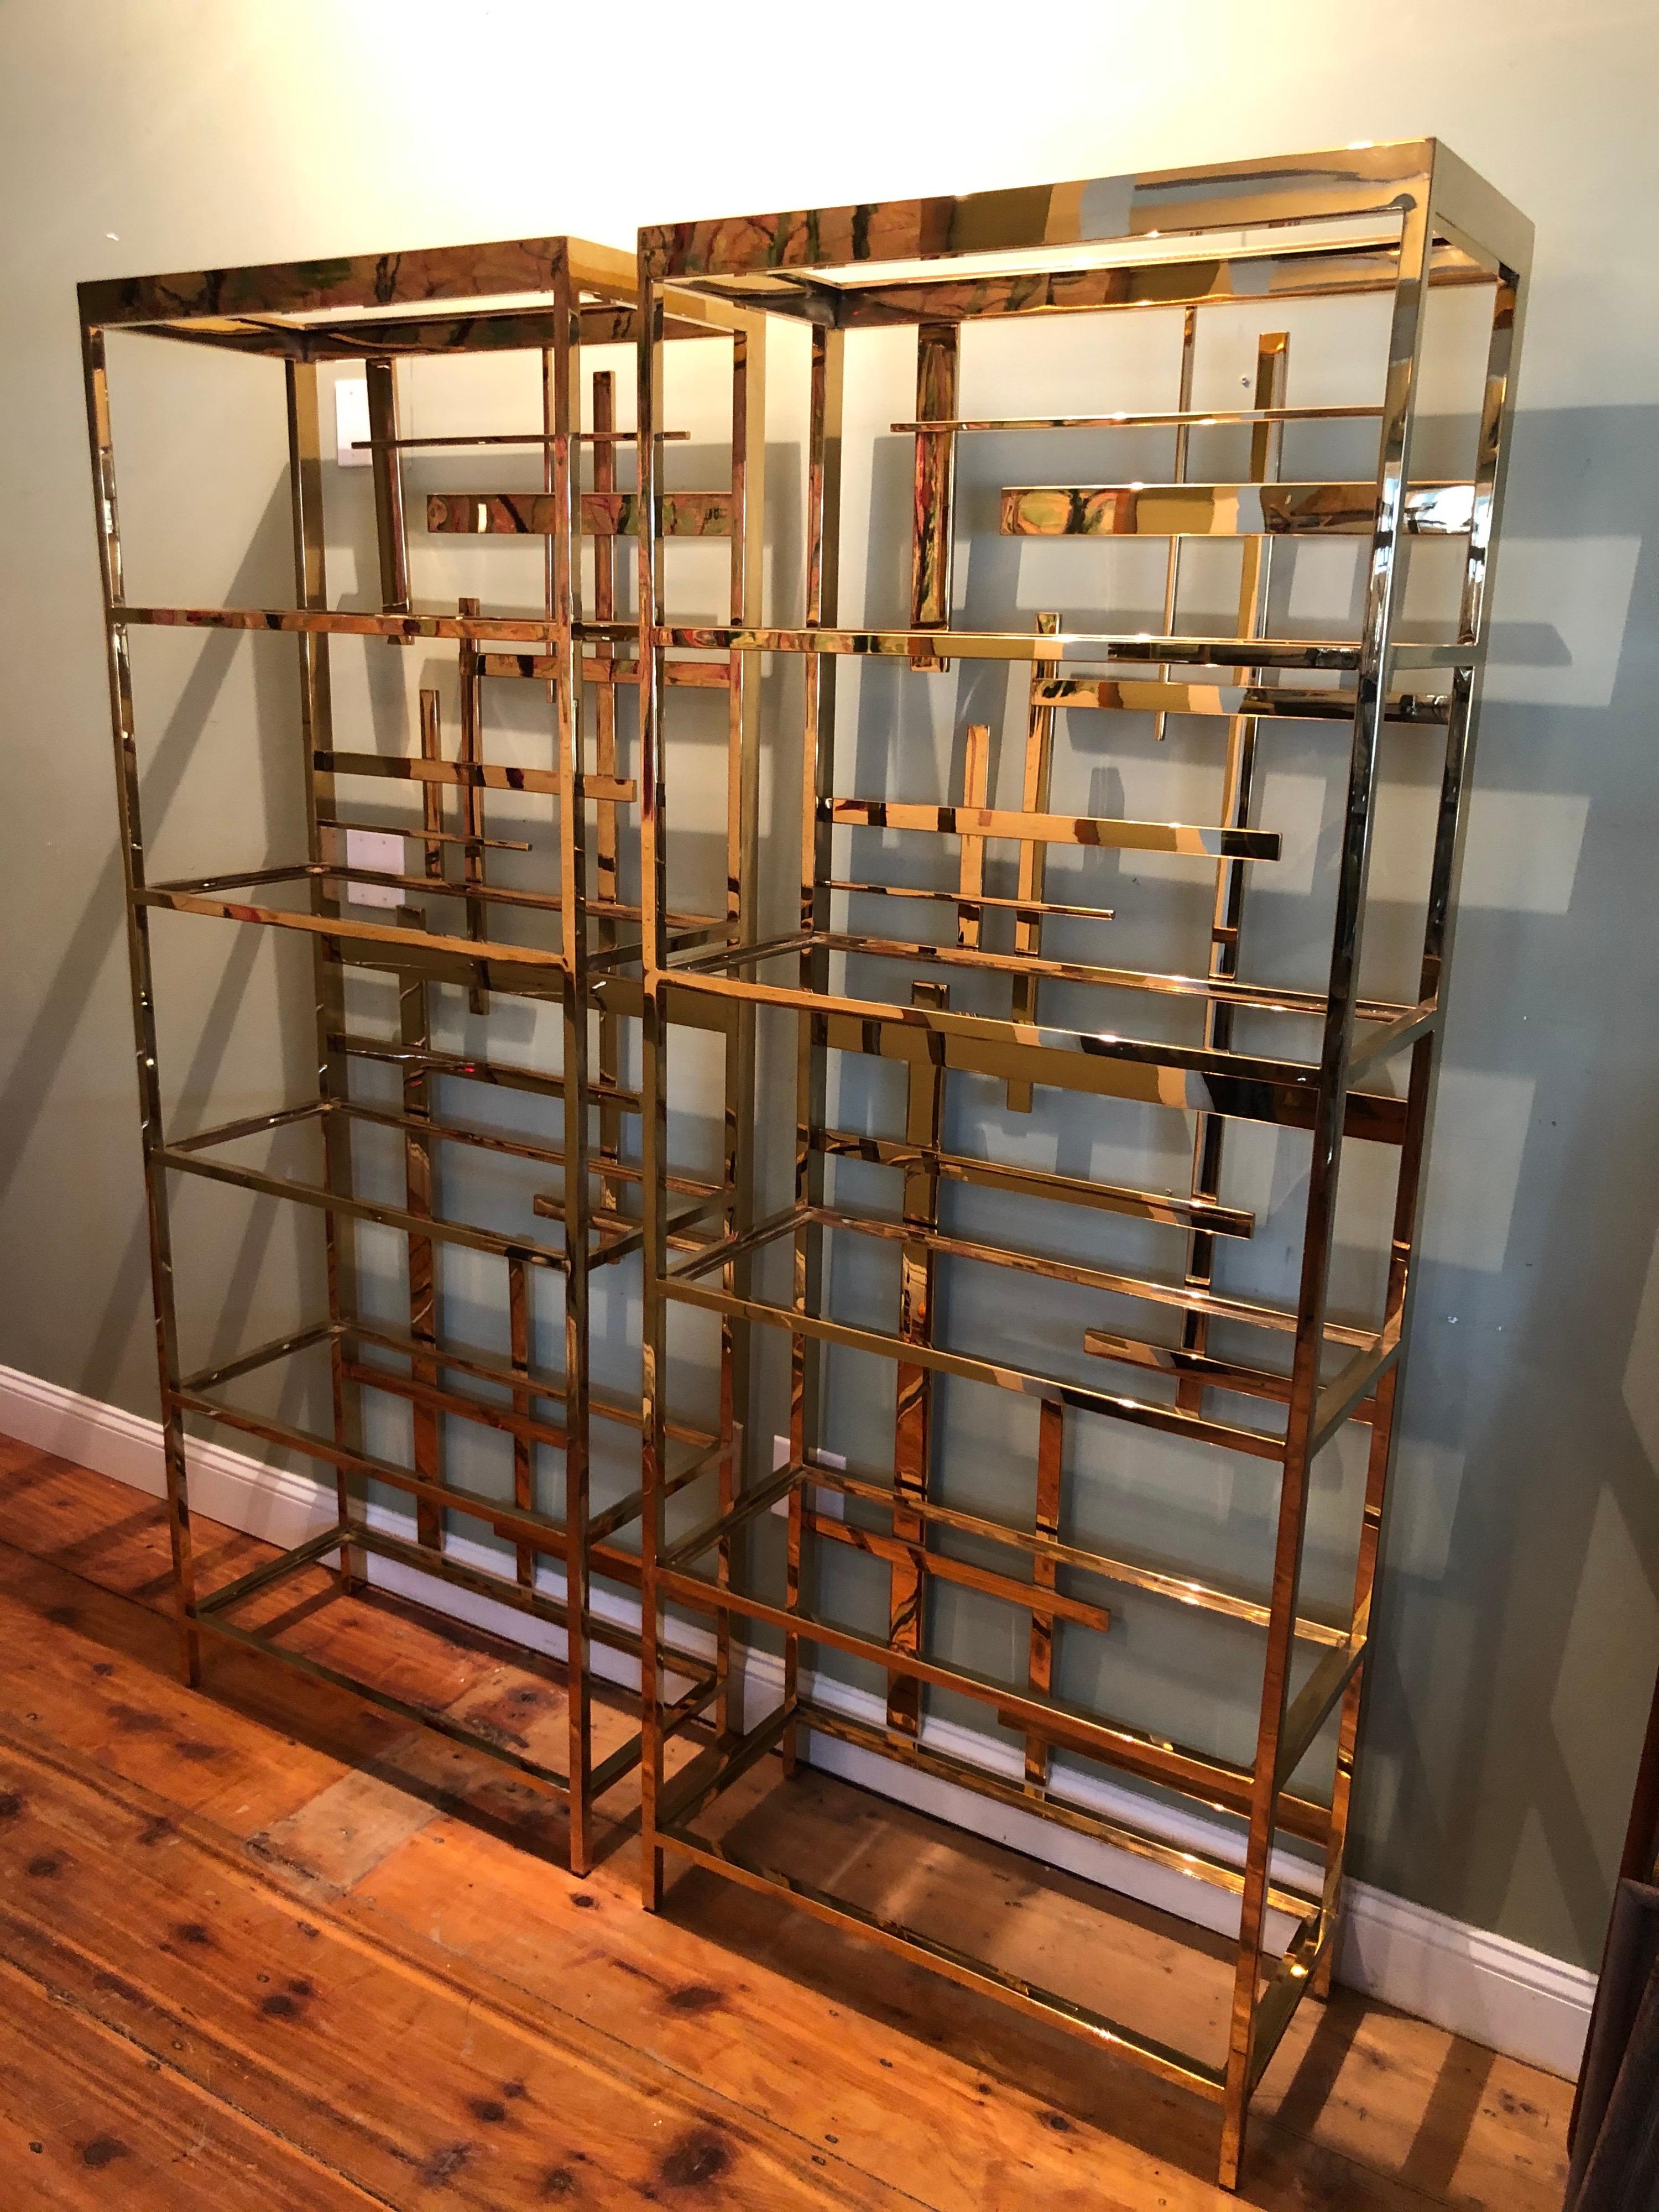 Pair of Mitchell Gold and Bob Williams brass étagères. These étagères are in themselves a piece of sculpture and would dramatically enhance any room. They come with five glass shelves each. Glass not shown but included.
Great for storage of books